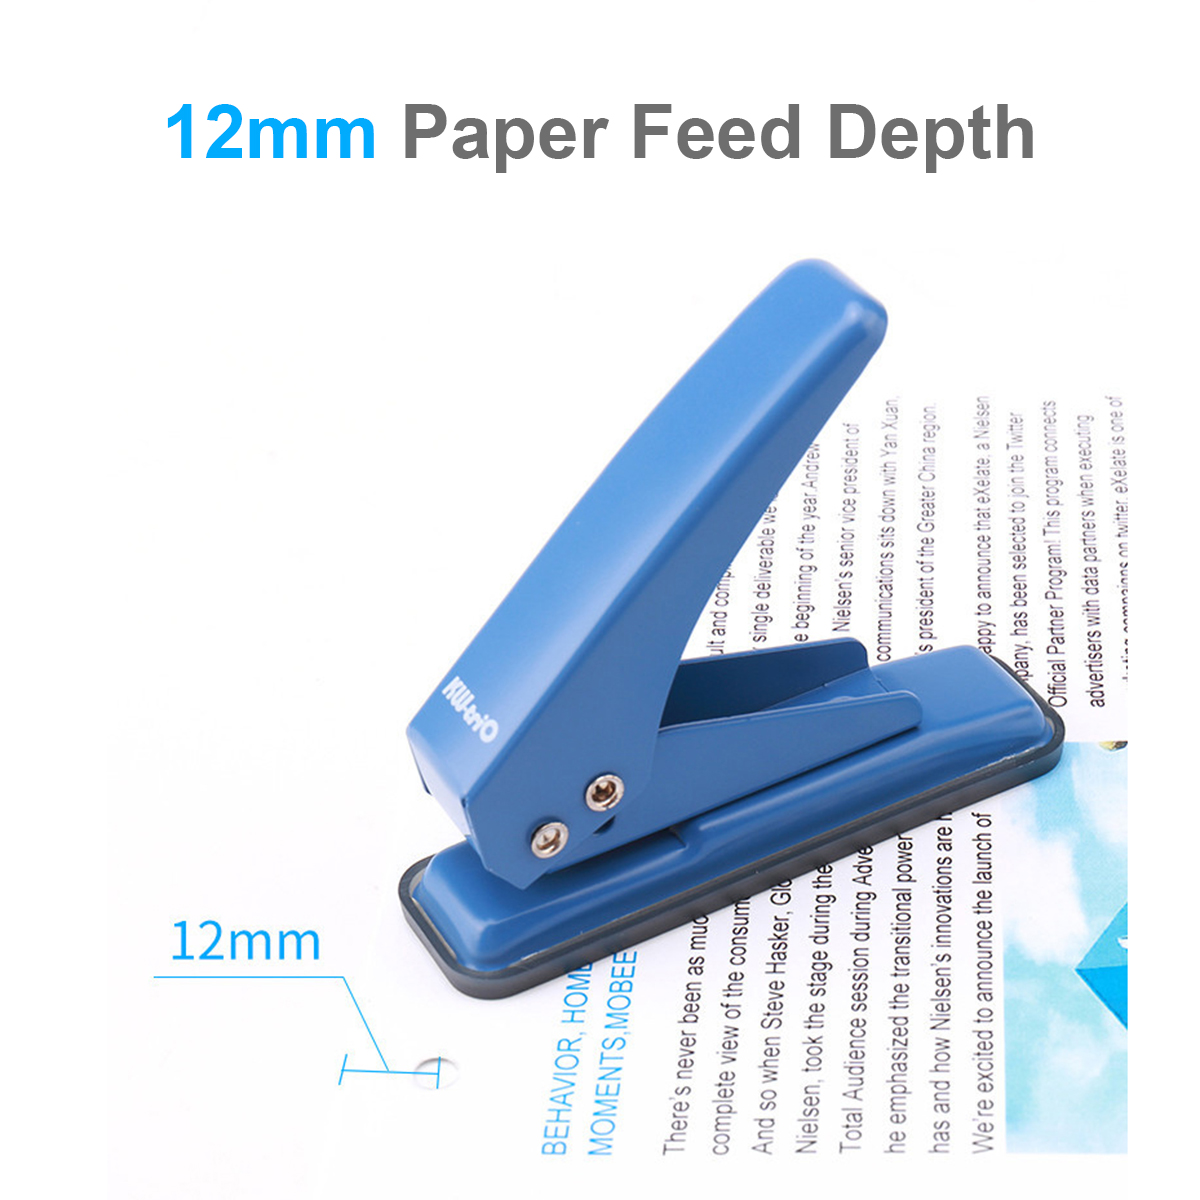 1-Hole Mini Metal Single Hole Punch Paper Puncher 20 Sheet 6mm Holes Reduced Effort with Scraps Collector for Office Supplies